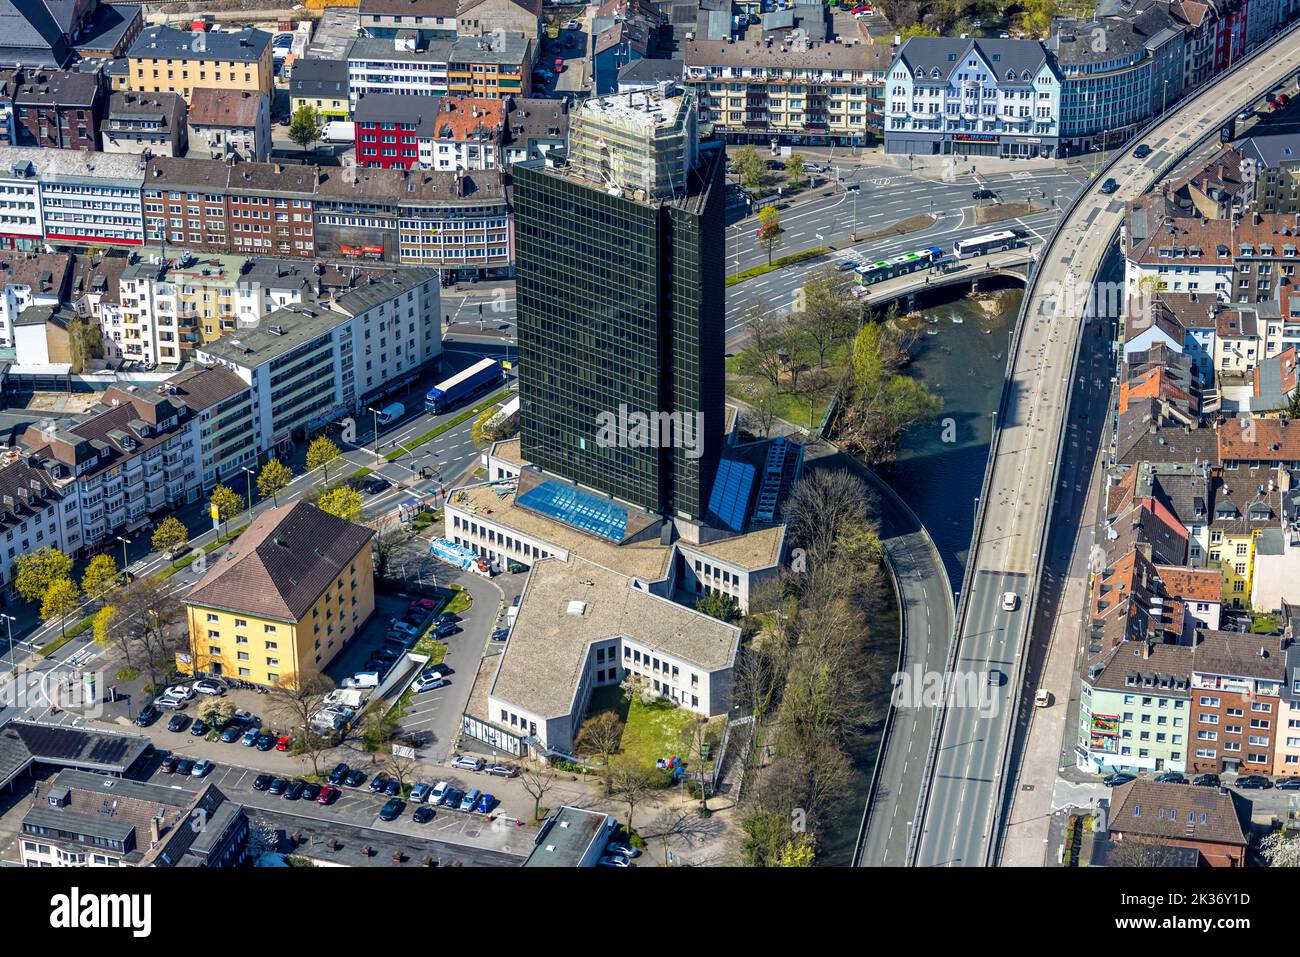 Aerial view, employment agency, roof works, middle city, Hagen, Ruhr area, North Rhine-Westphalia, Germany, Employment office, Authority, DE, Europe, Stock Photo